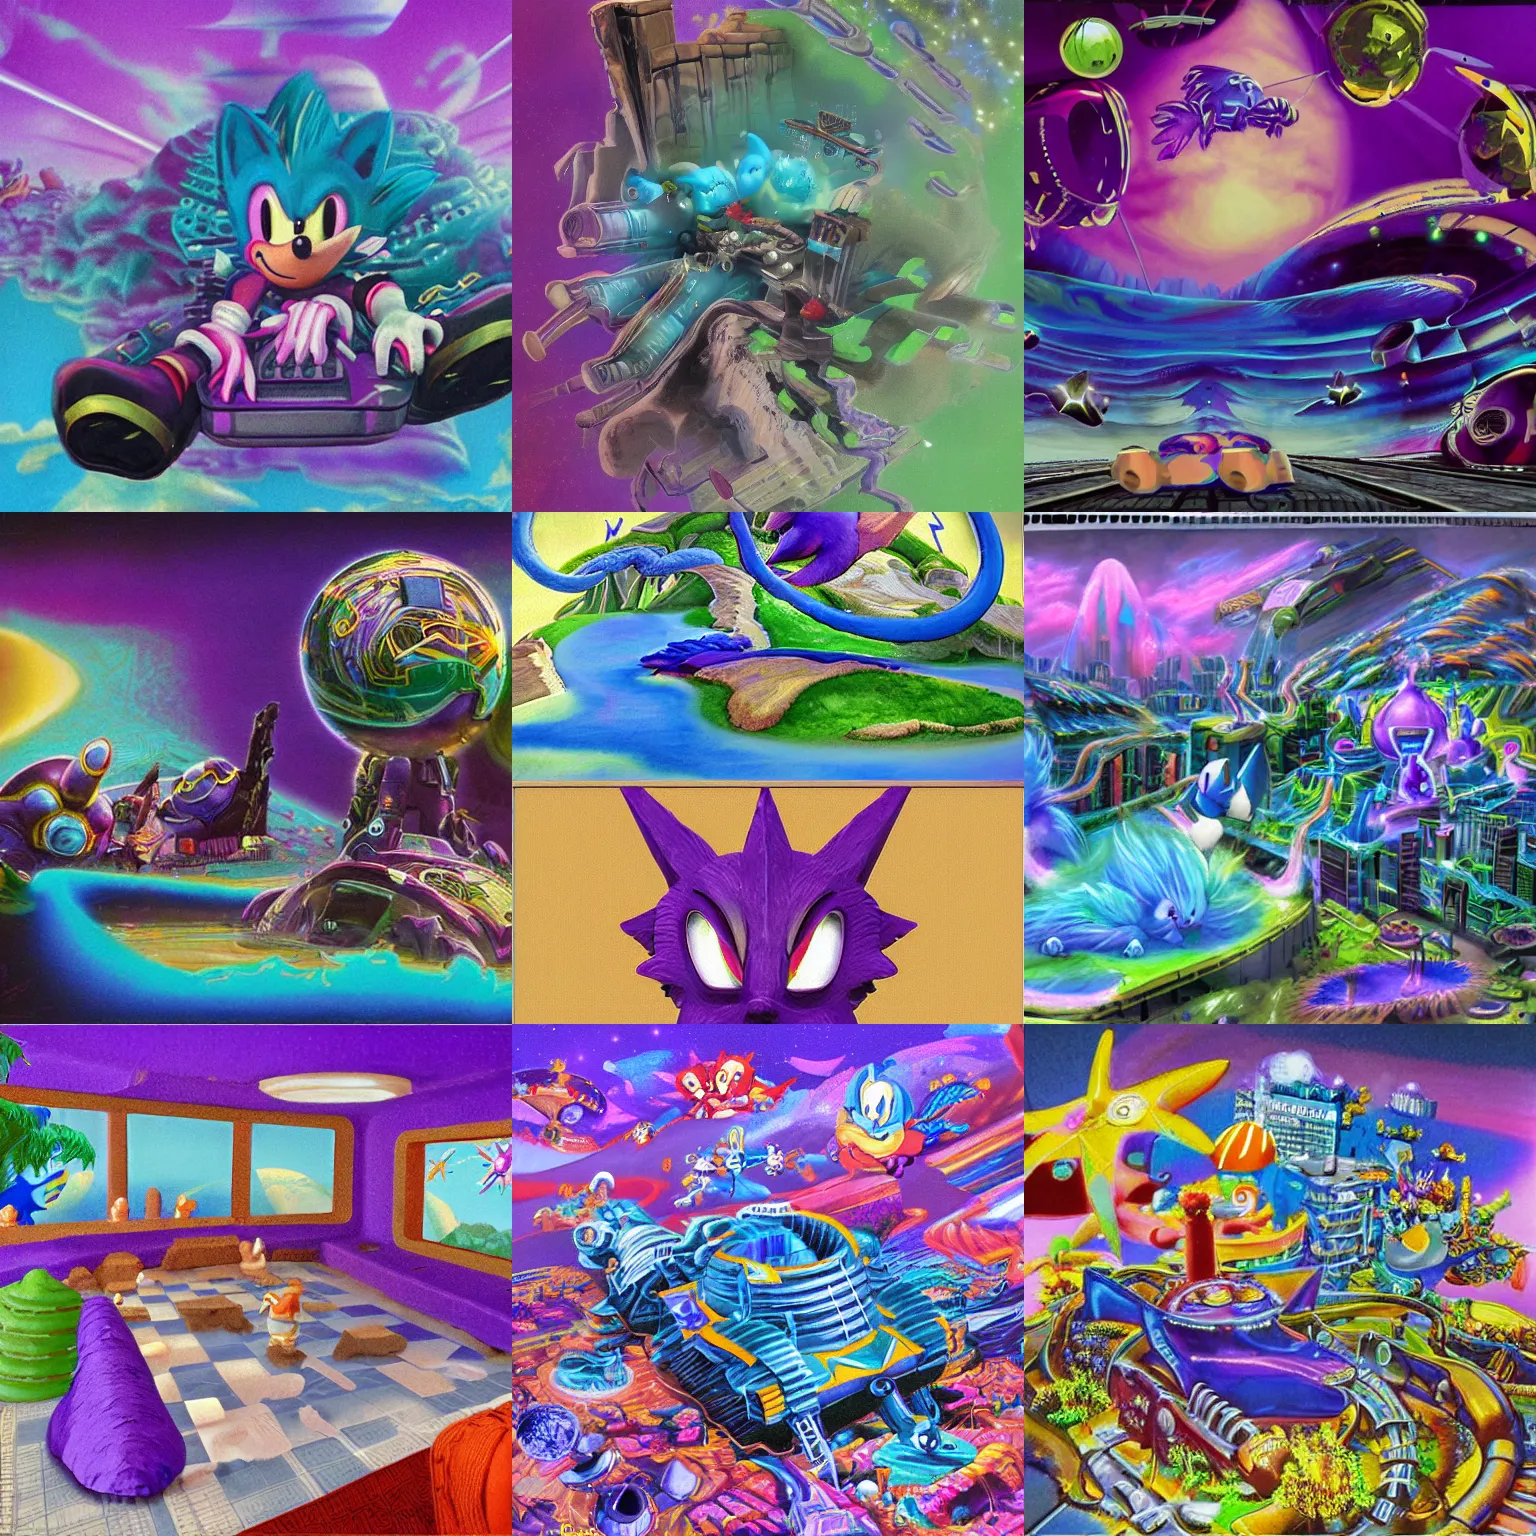 Prompt: sonic hedgehog dreaming portrait deconstructivist claymation scifi matte painting landscape of a surreal stars, jazz cup detailed professional soft pastels high quality airbrush art album cover of a liquid dissolving airbrush art lsd sonic the hedgehog swimming through cyberspace purple teal checkerboard background 1 9 9 0 s 1 9 9 2 sega genesis rareware video game album cover